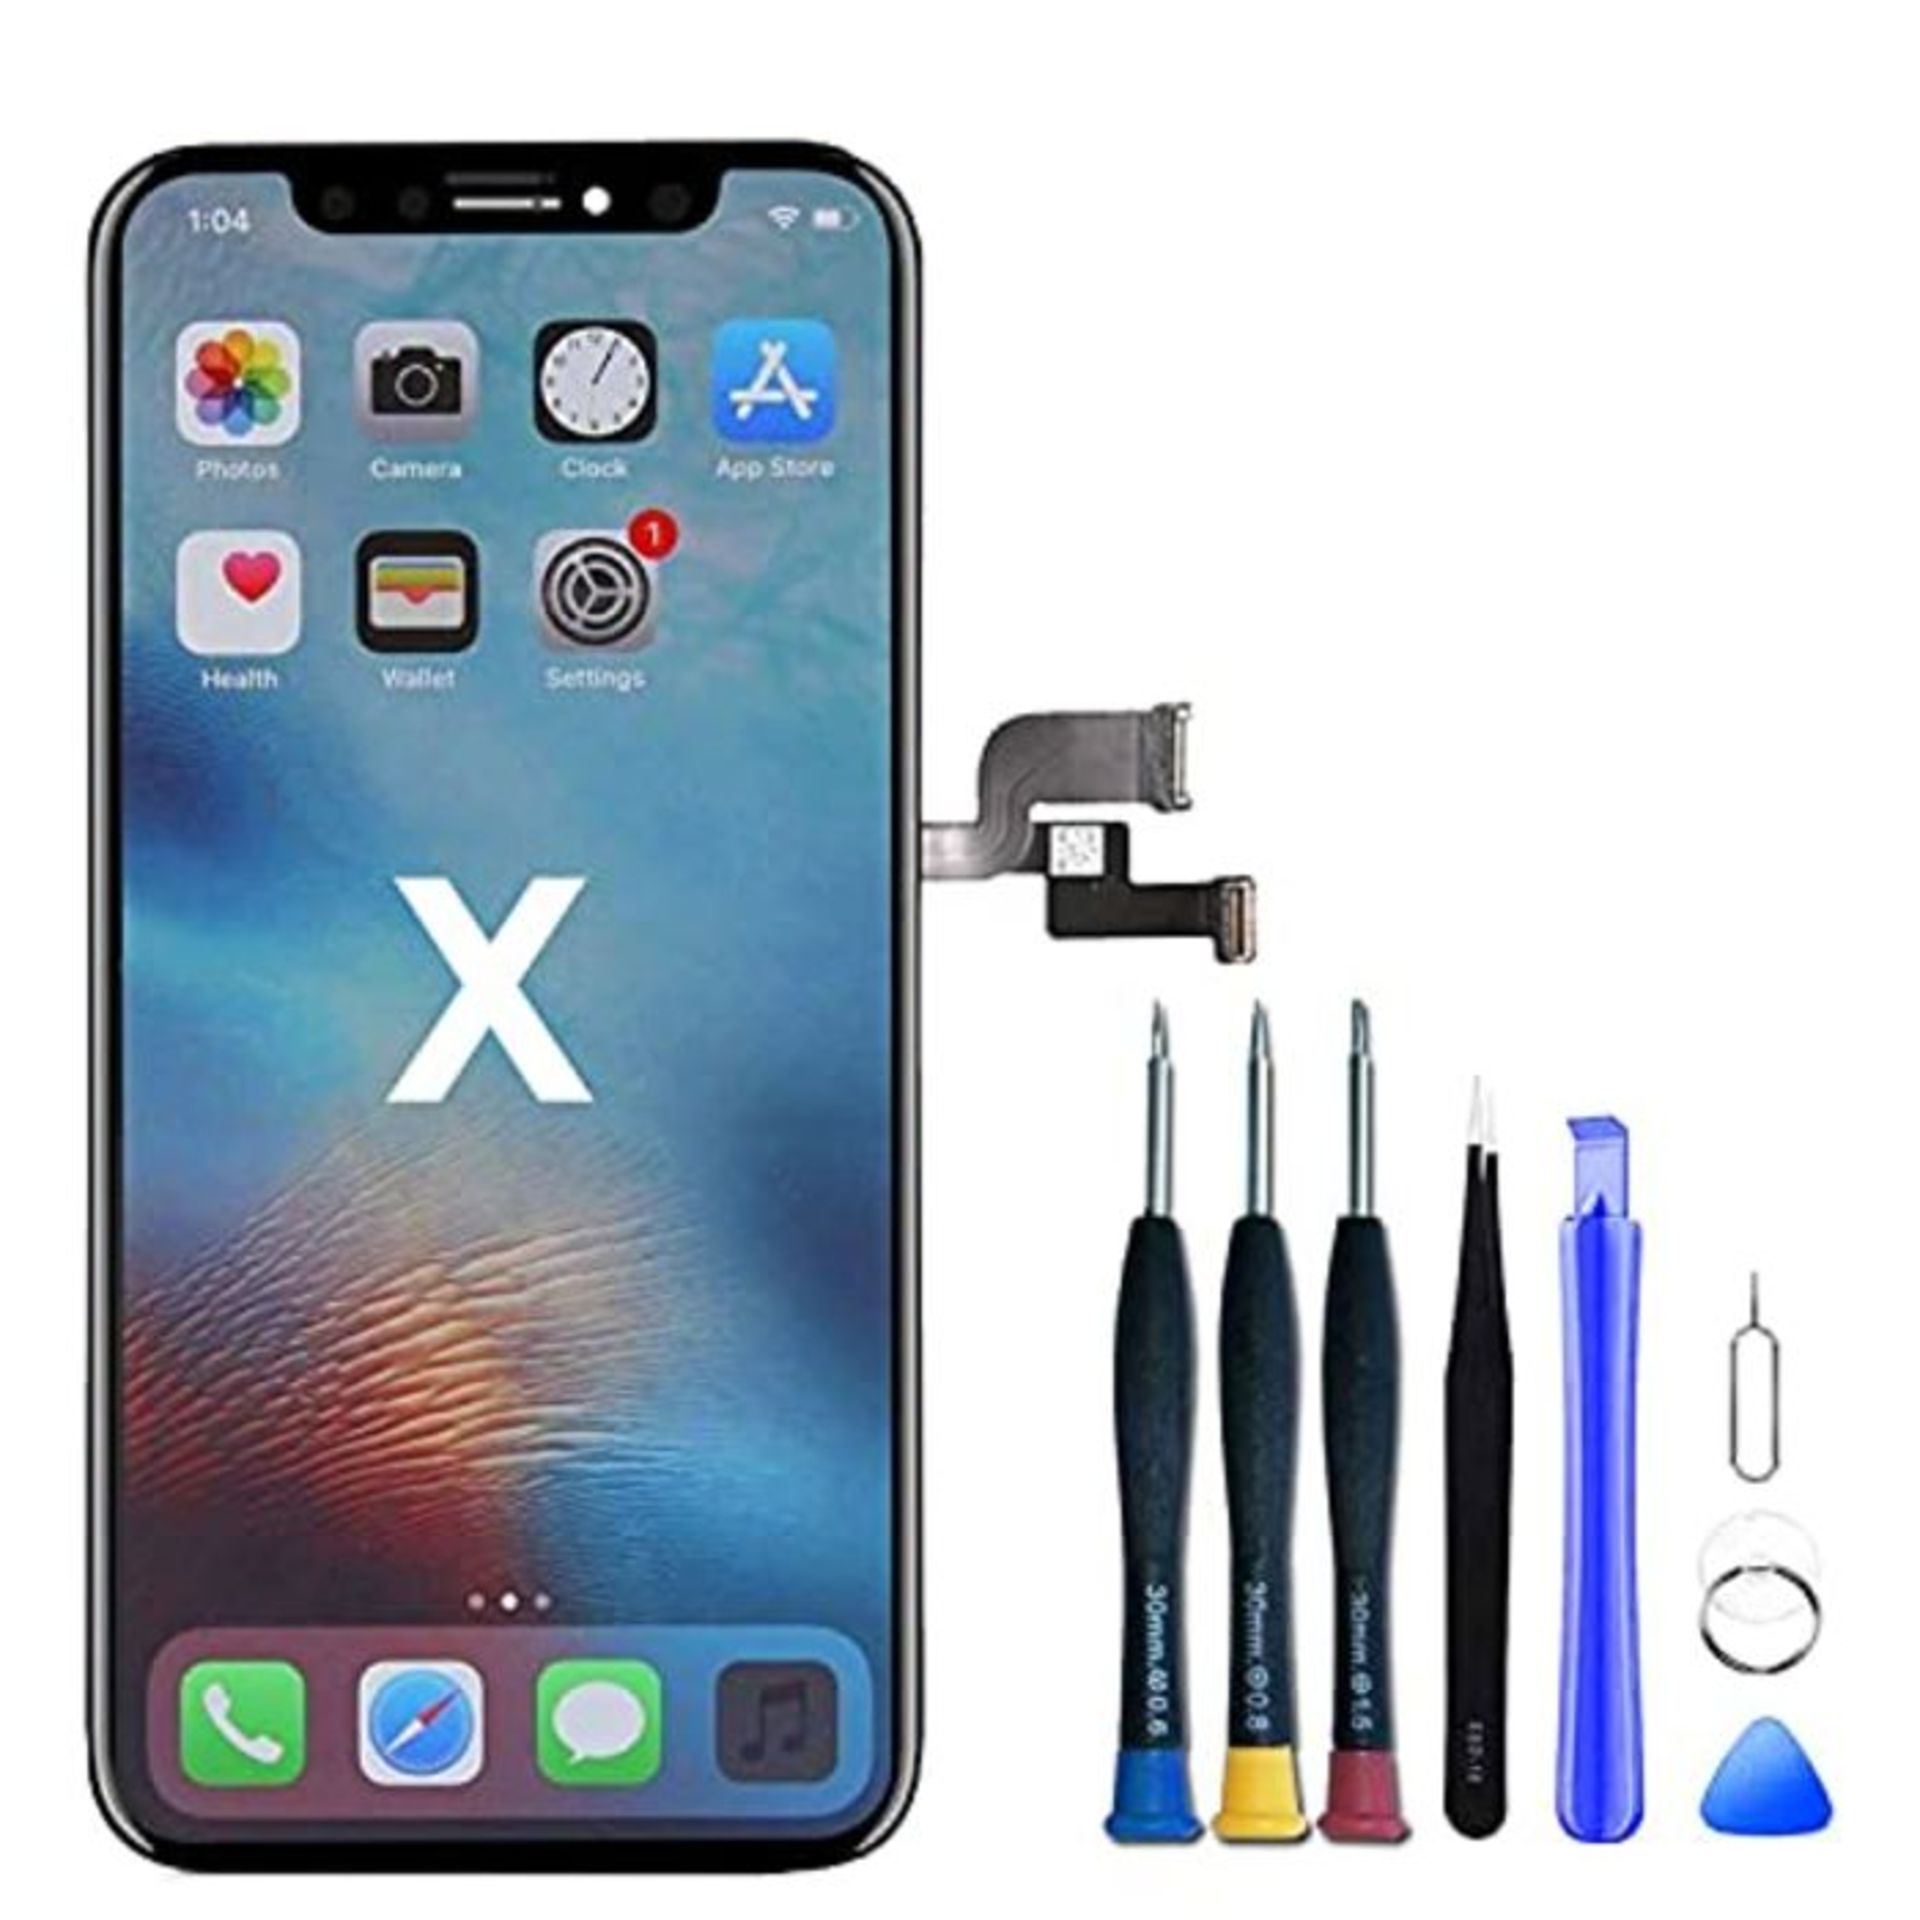 Hoonyer for iPhone X Screen Replacement LCD[Not OLED] Touch Screen Digitizer Assembly